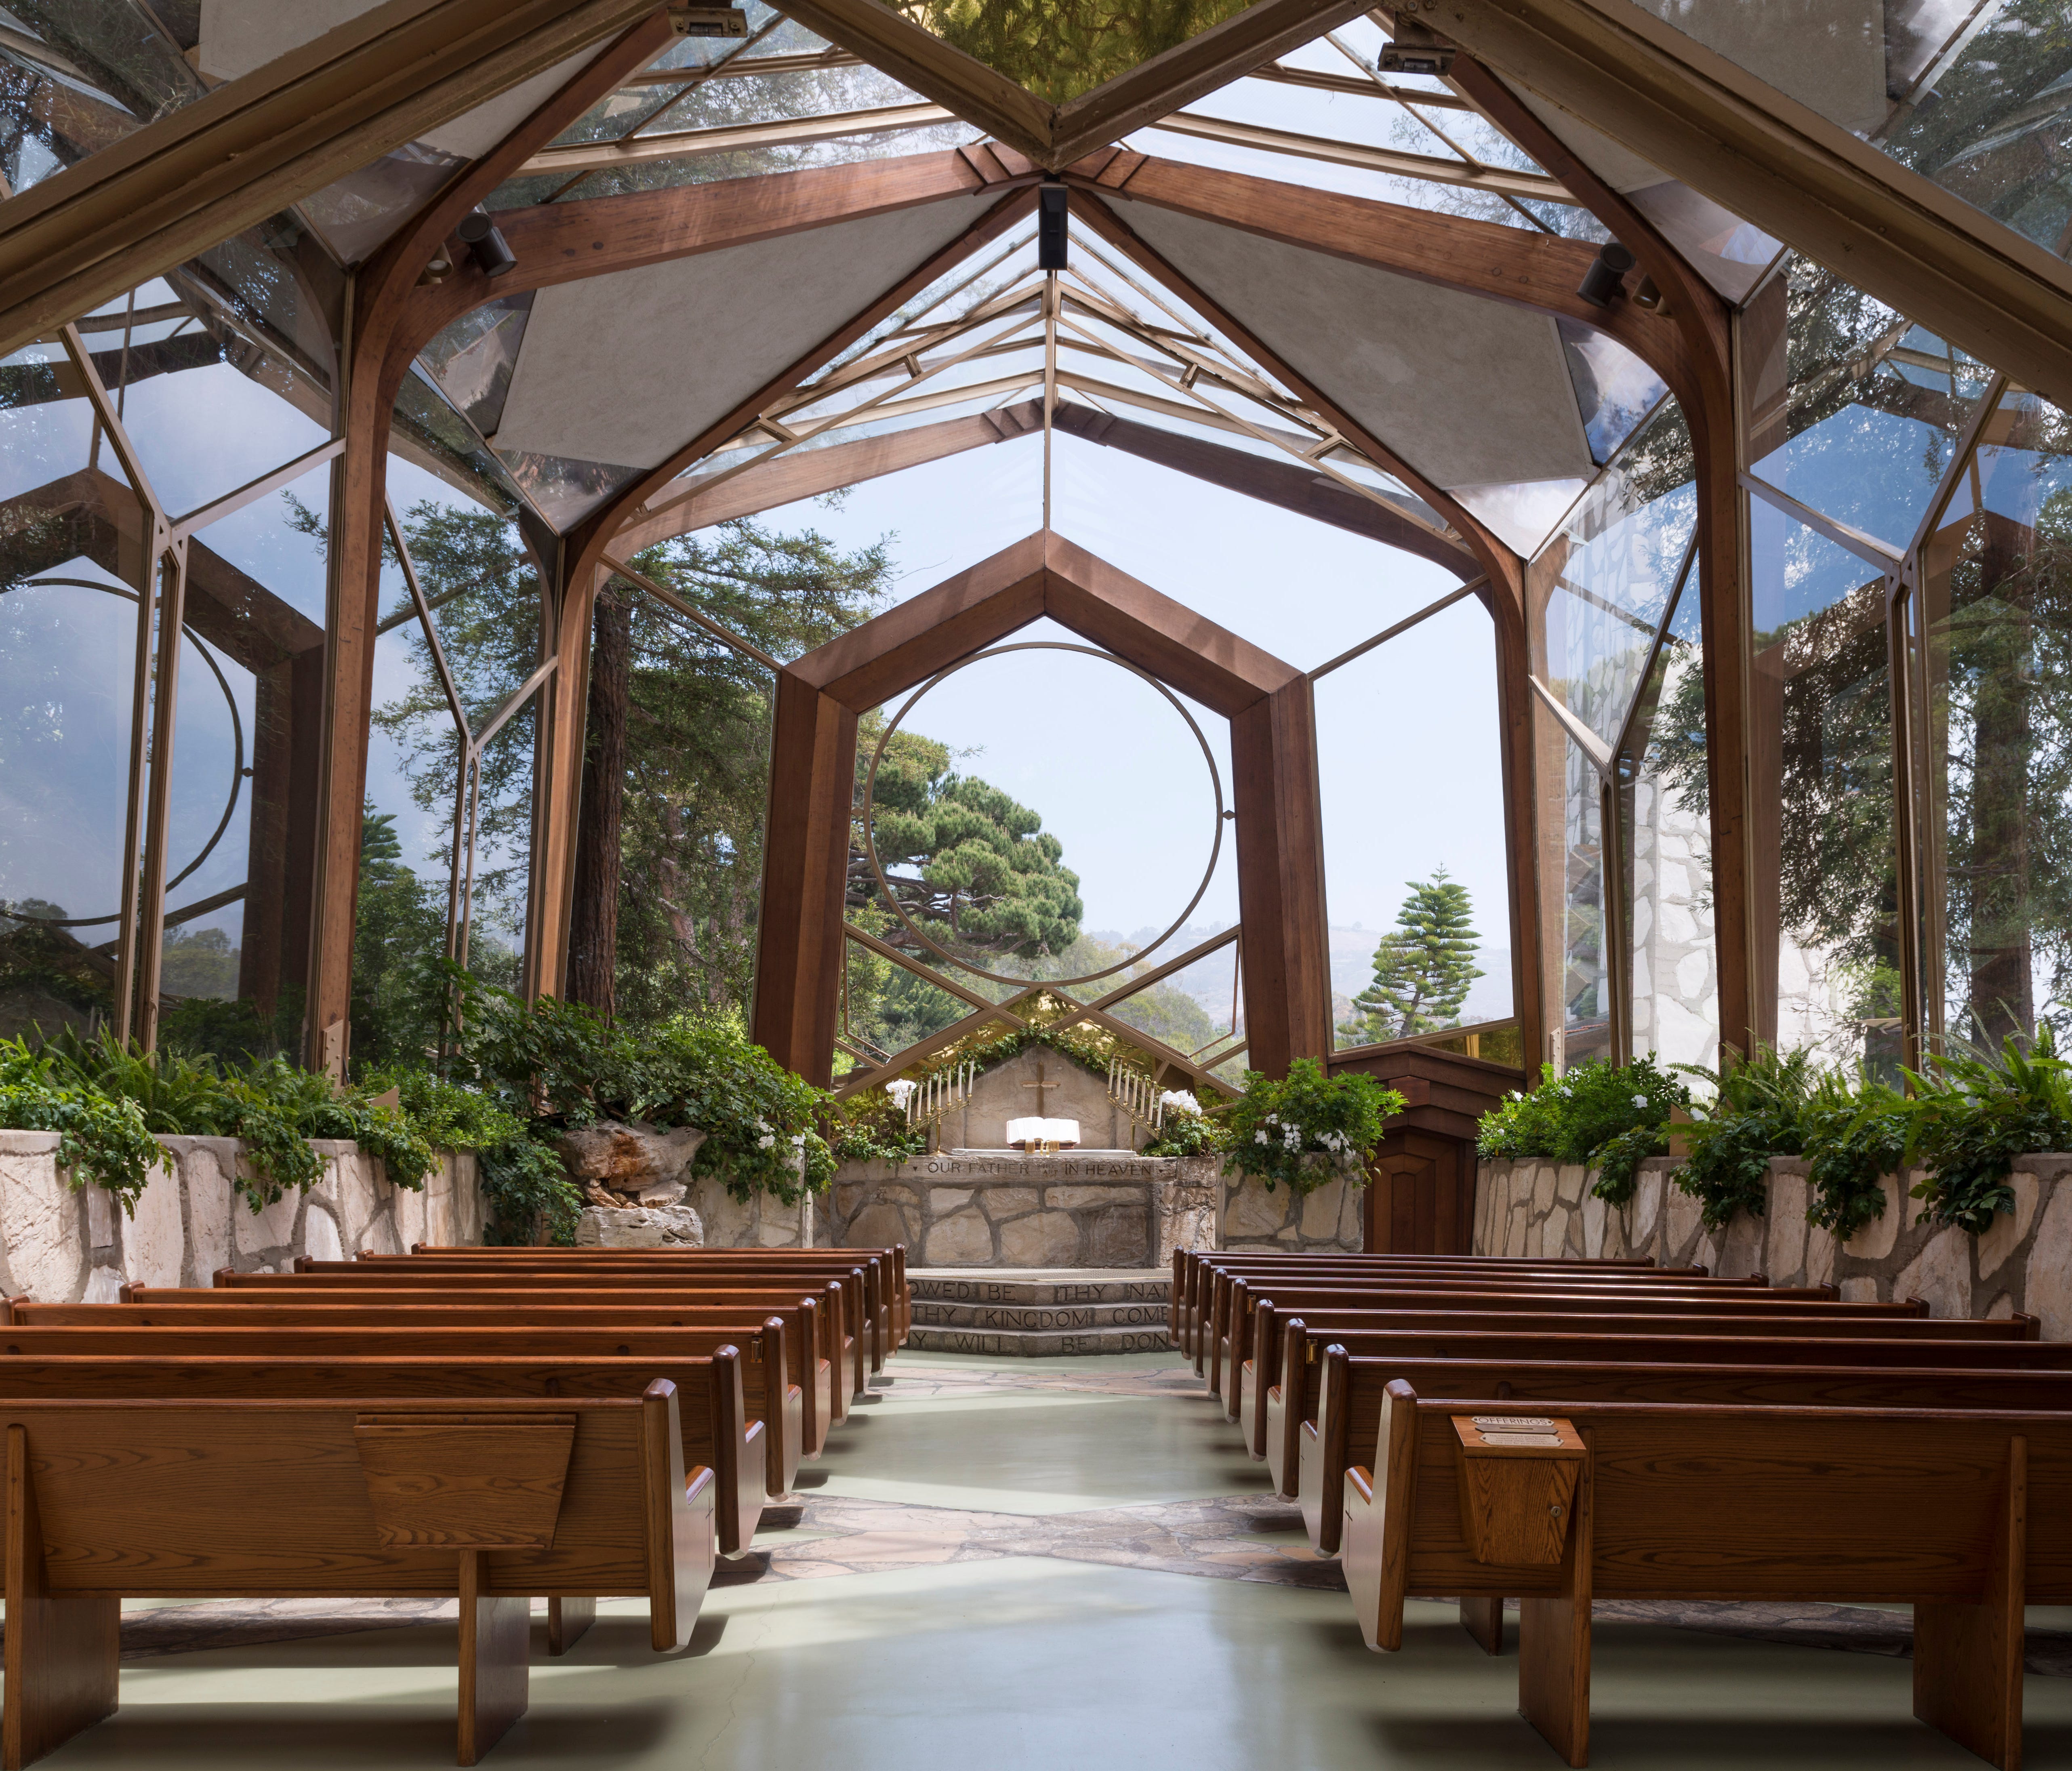 Wayfarers Chapel, Rancho Palos Verdes: Located on cliffs above the Pacific Ocean, the Wayfarers Chapel is the work of Lloyd Wright, son of the far more famous Frank Lloyd Wright. A glass pavilion, it was designed to anticipate the overarching 